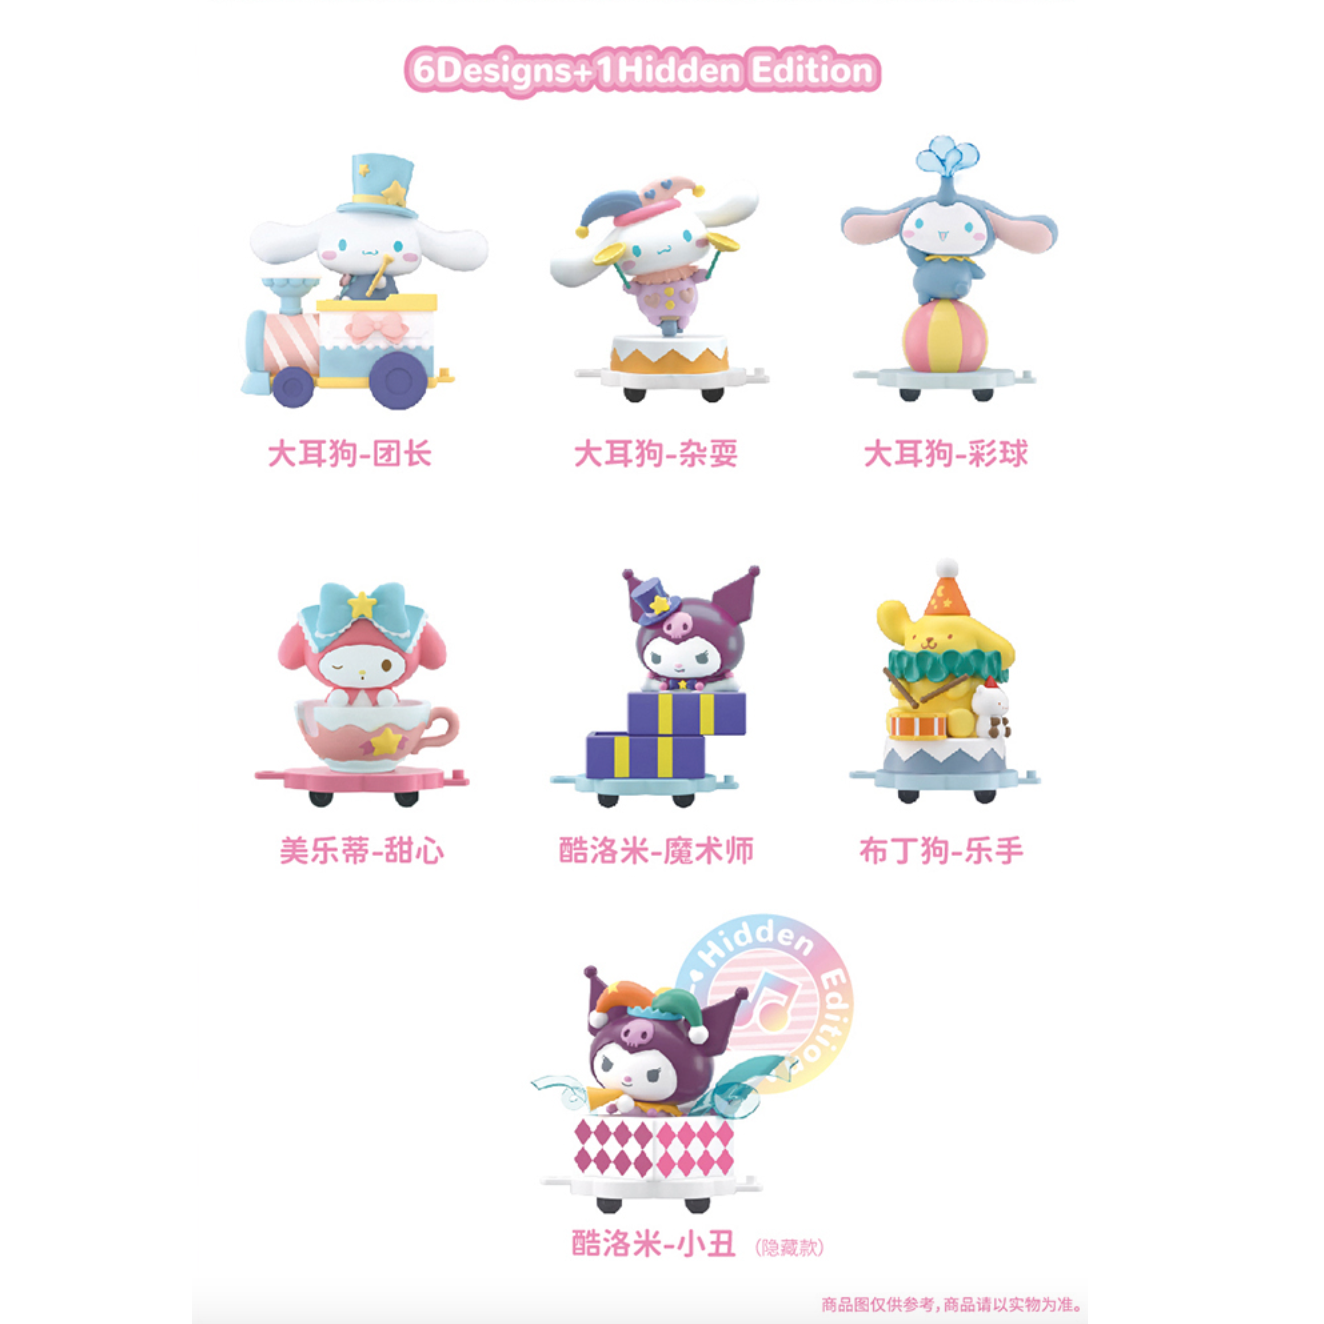 52TOYS Sanrio Characters Travelling Circus Series-Whole Display Box (6pcs)-52Toys-Ace Cards & Collectibles